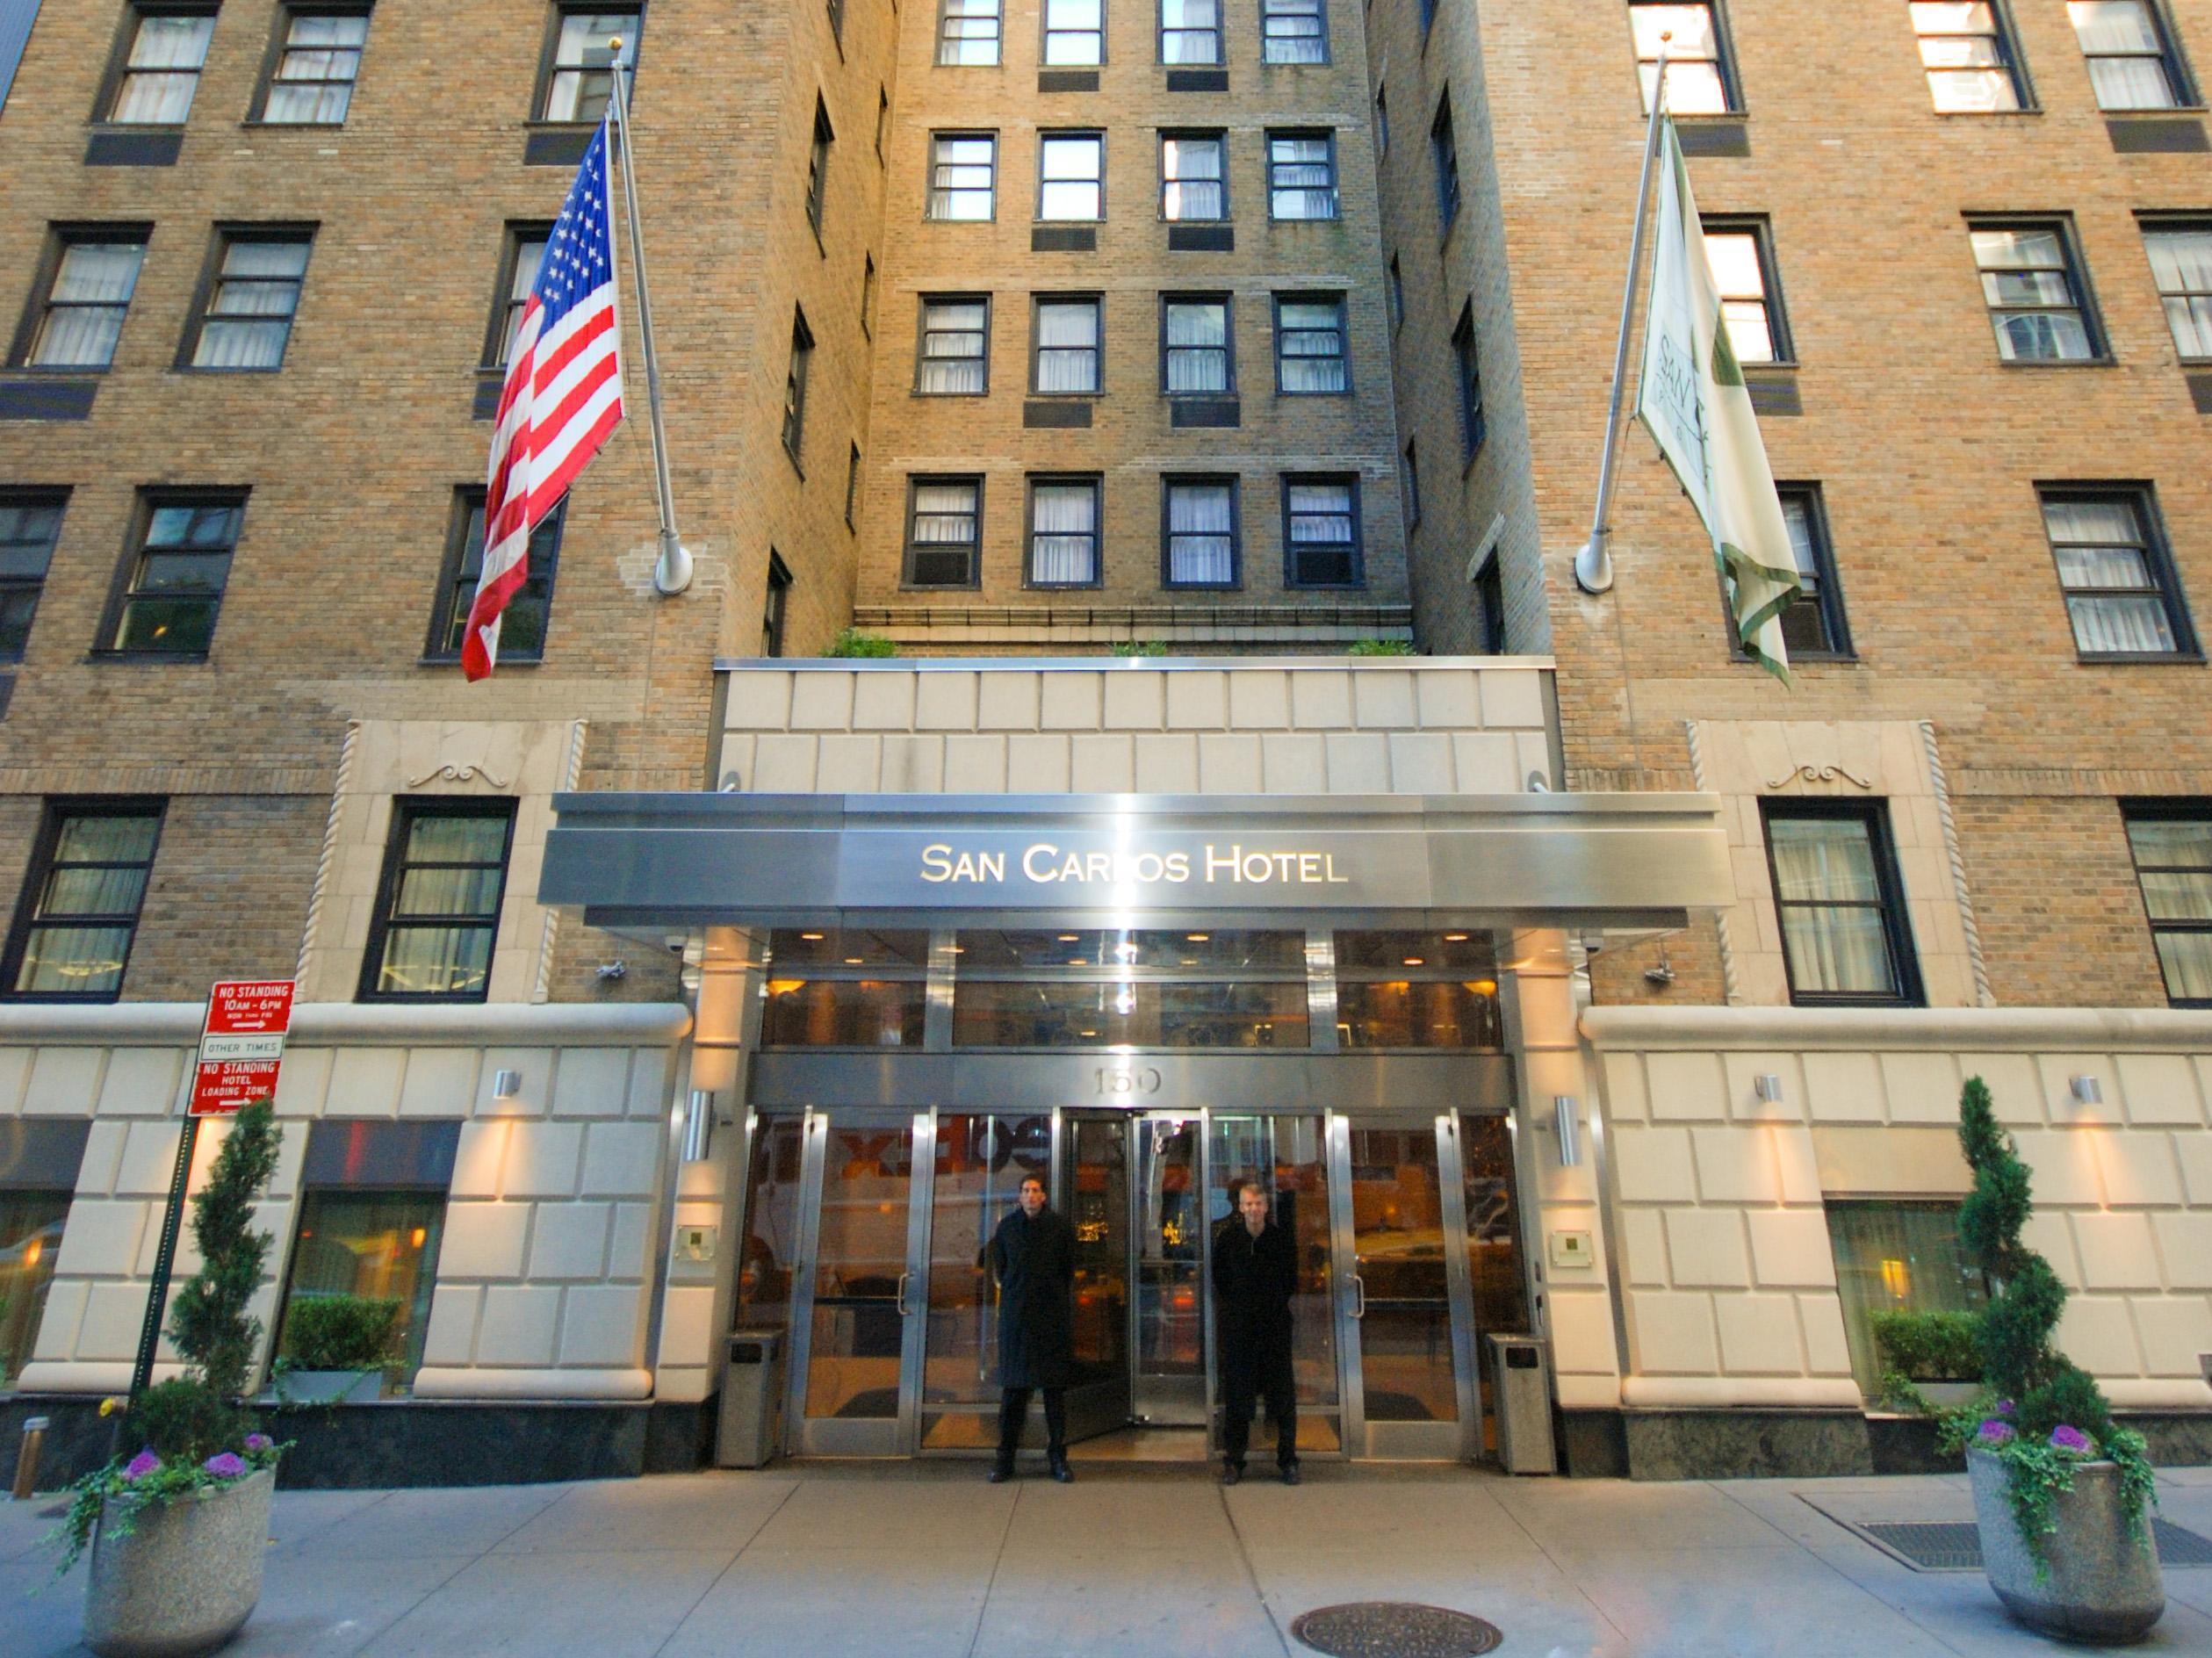 San Carlos Hotel New York State 
 FAQ 2017, What facilities are there in San Carlos Hotel New York State 
 2017, What Languages Spoken are Supported in San Carlos Hotel New York State 
 2017, Which payment cards are accepted in San Carlos Hotel New York State 
 , New York State 
 San Carlos Hotel room facilities and services Q&A 2017, New York State 
 San Carlos Hotel online booking services 2017, New York State 
 San Carlos Hotel address 2017, New York State 
 San Carlos Hotel telephone number 2017,New York State 
 San Carlos Hotel map 2017, New York State 
 San Carlos Hotel traffic guide 2017, how to go New York State 
 San Carlos Hotel, New York State 
 San Carlos Hotel booking online 2017, New York State 
 San Carlos Hotel room types 2017.